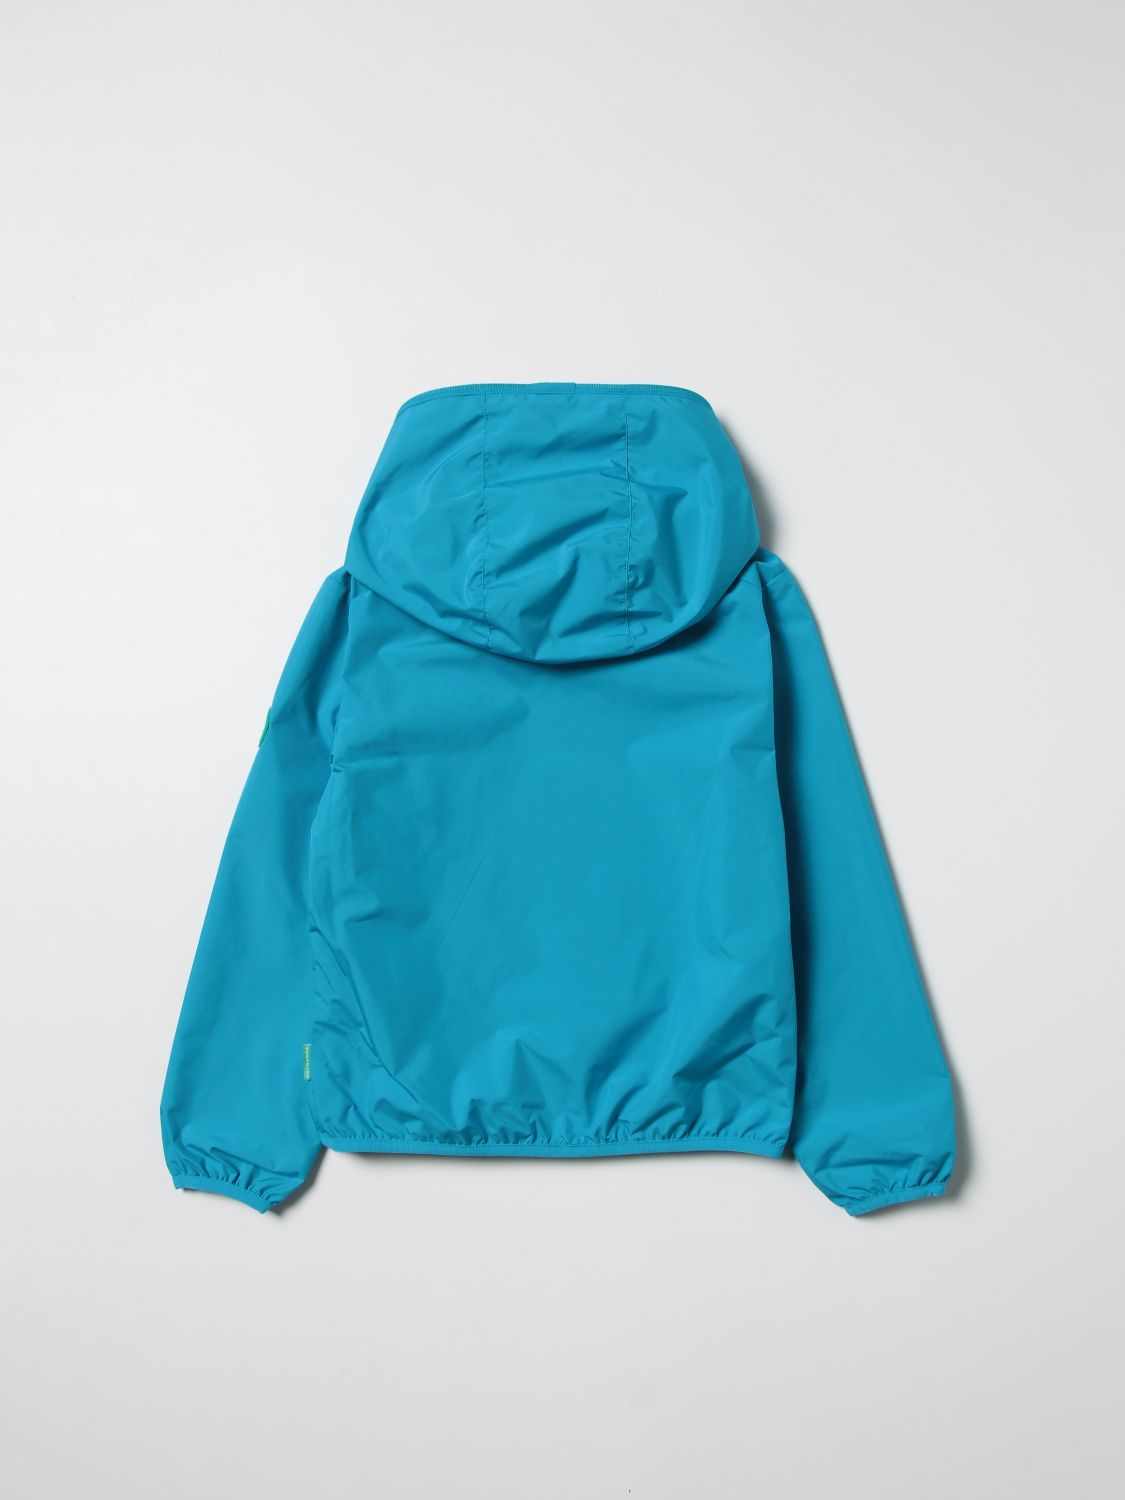 Jacket Save The Duck: Jacket kids Save The Duck sky blue 2